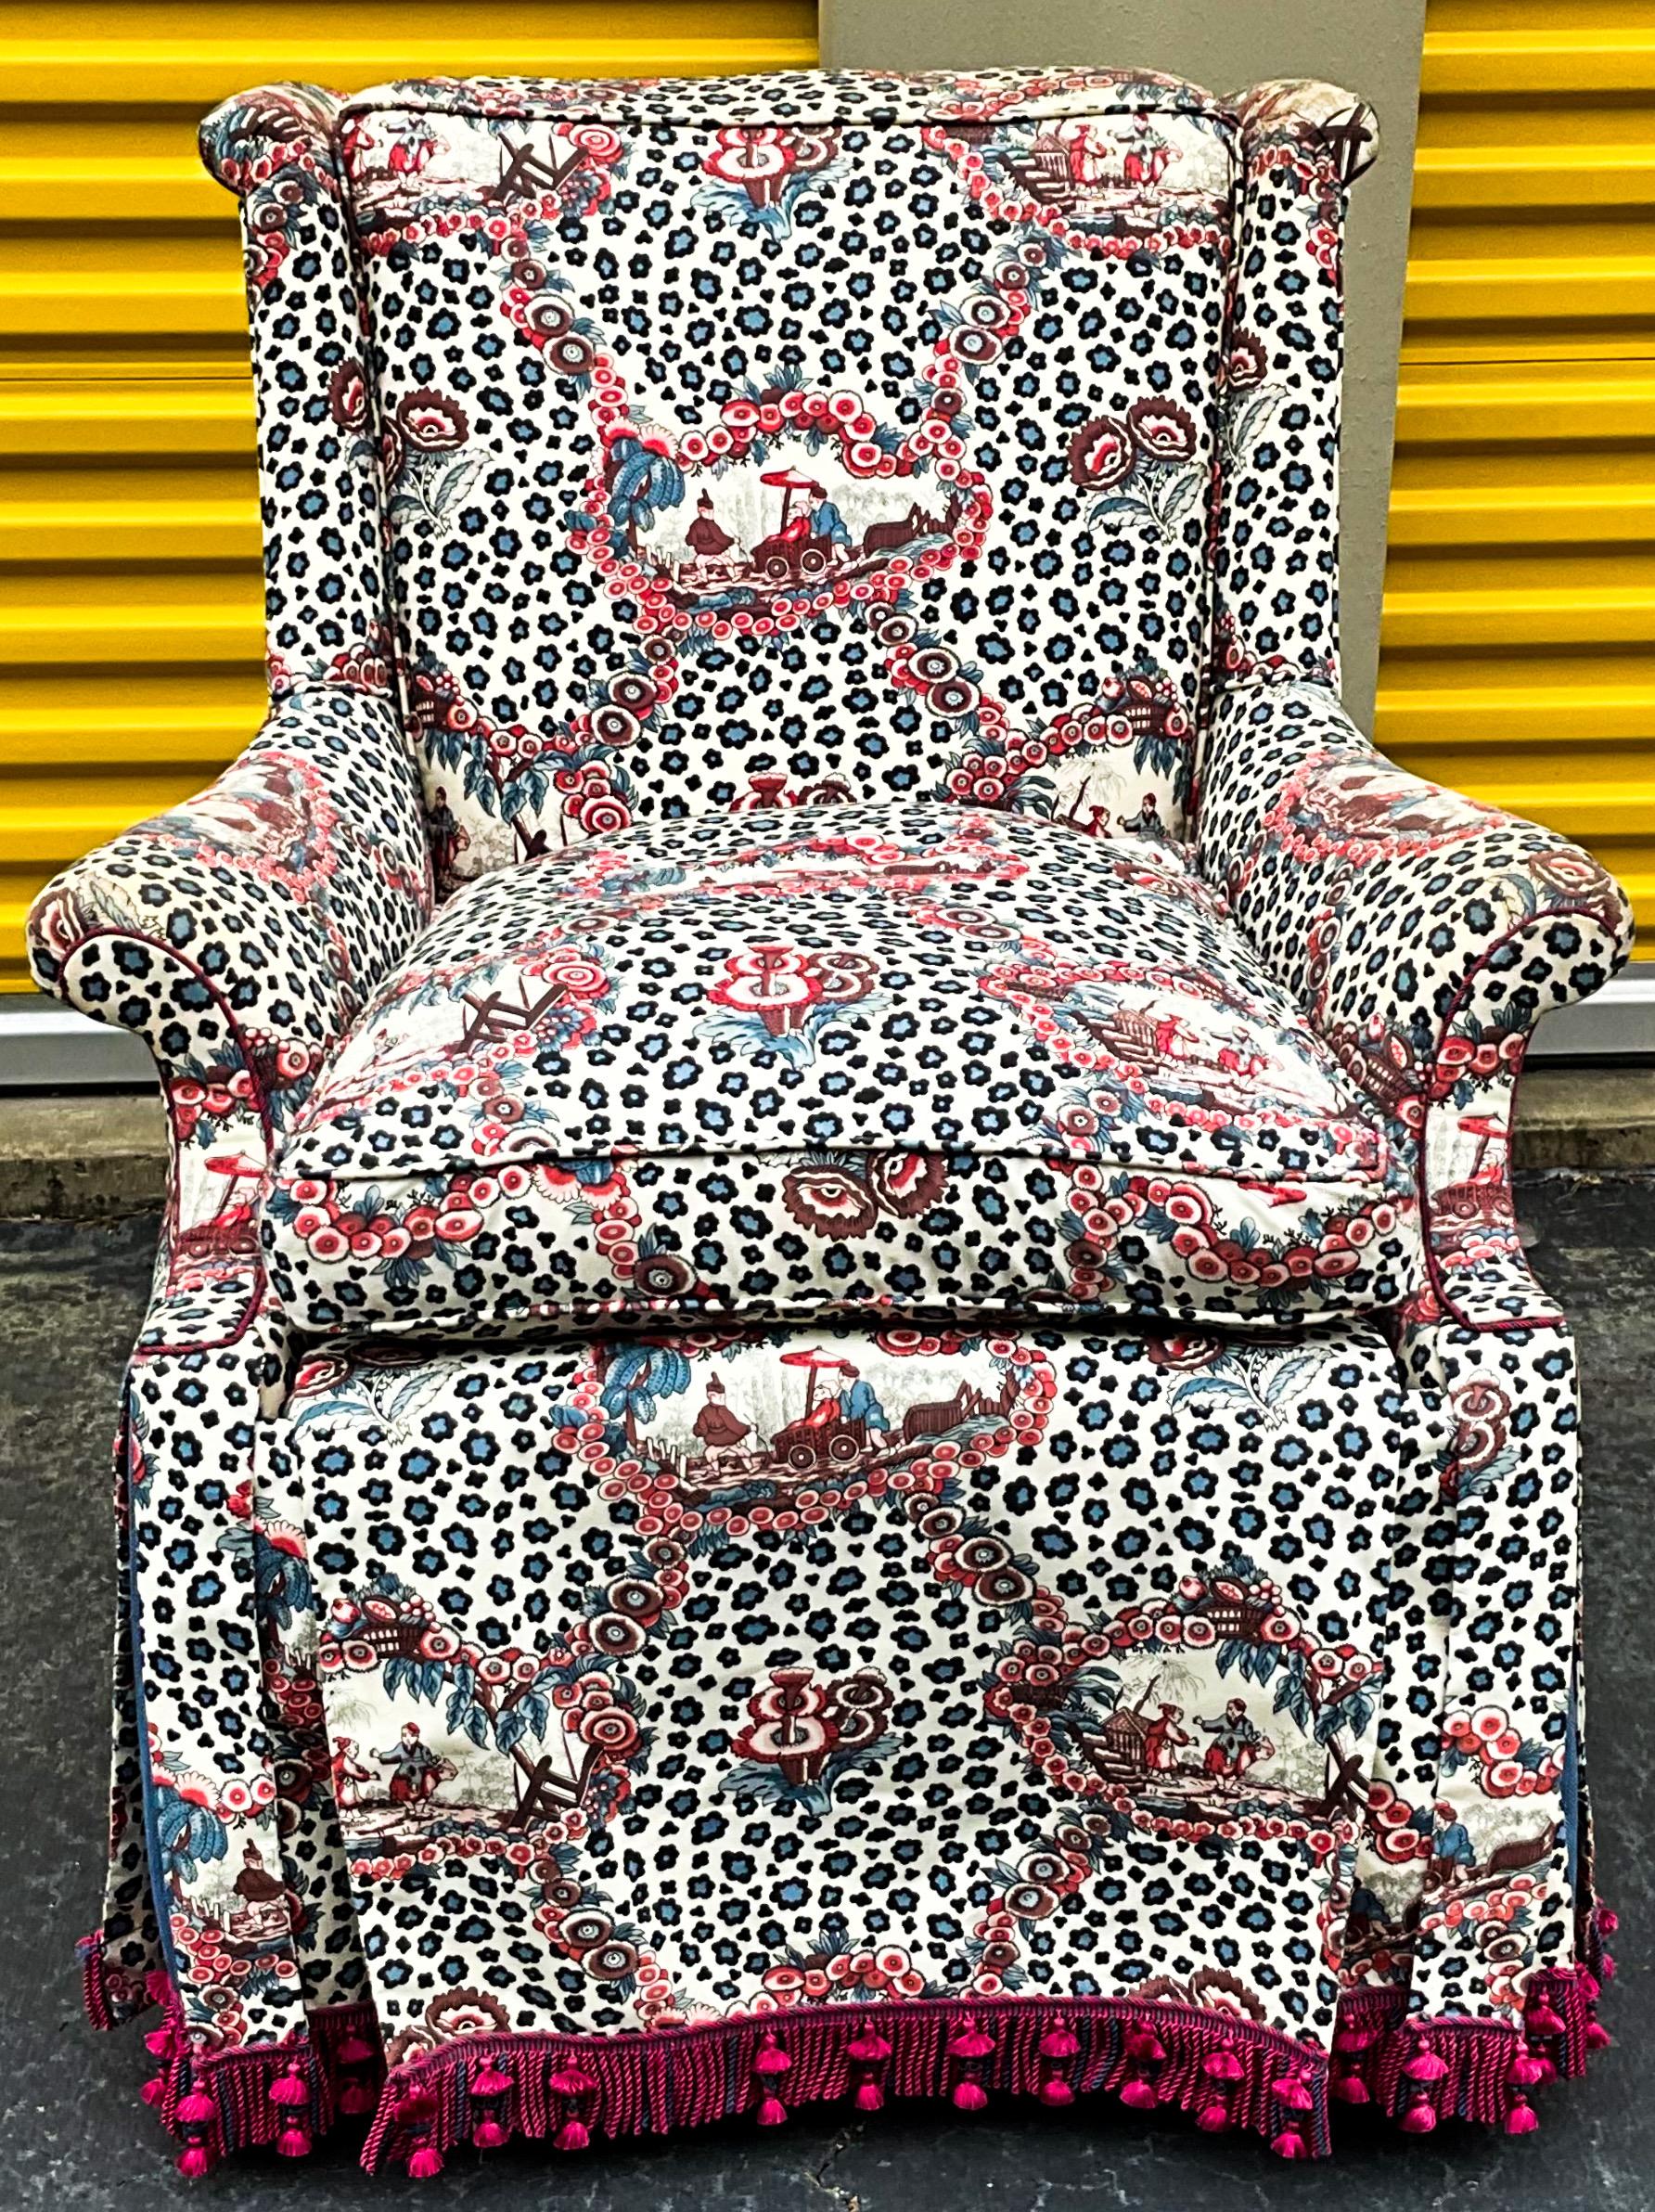 This is a 1930s wingback chair that was upholstered in the 1970s in this wonderful Brunschwig and Fils chinoiserie and leopard upholstery. The lady who had this upholstered was clearly a woman after my own heart with elaborate trim details